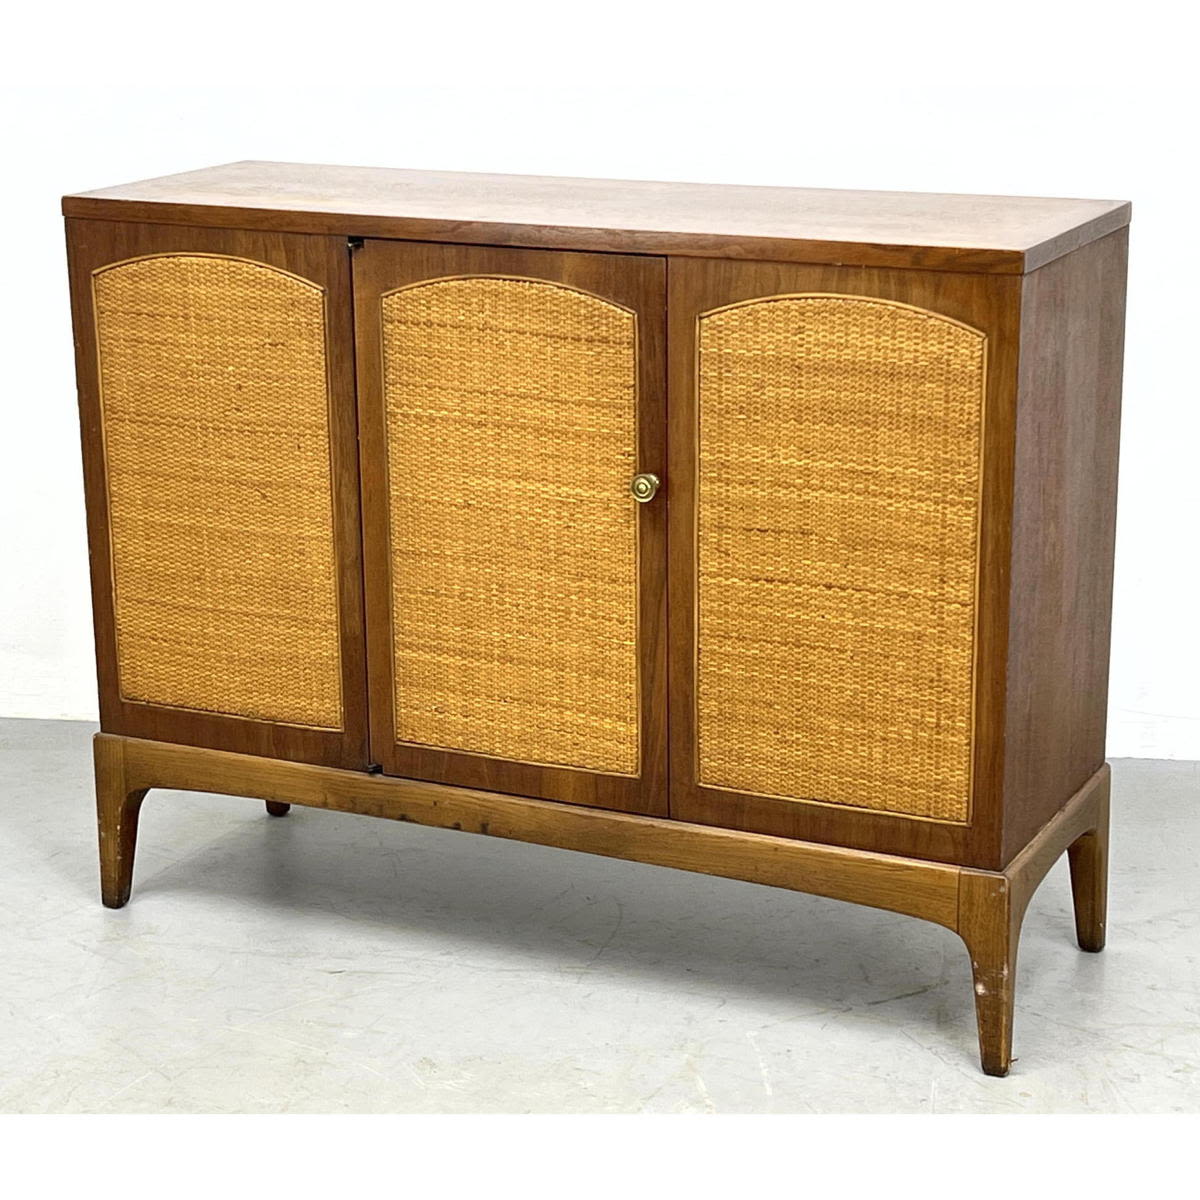 LANE American Modern Cabinet with